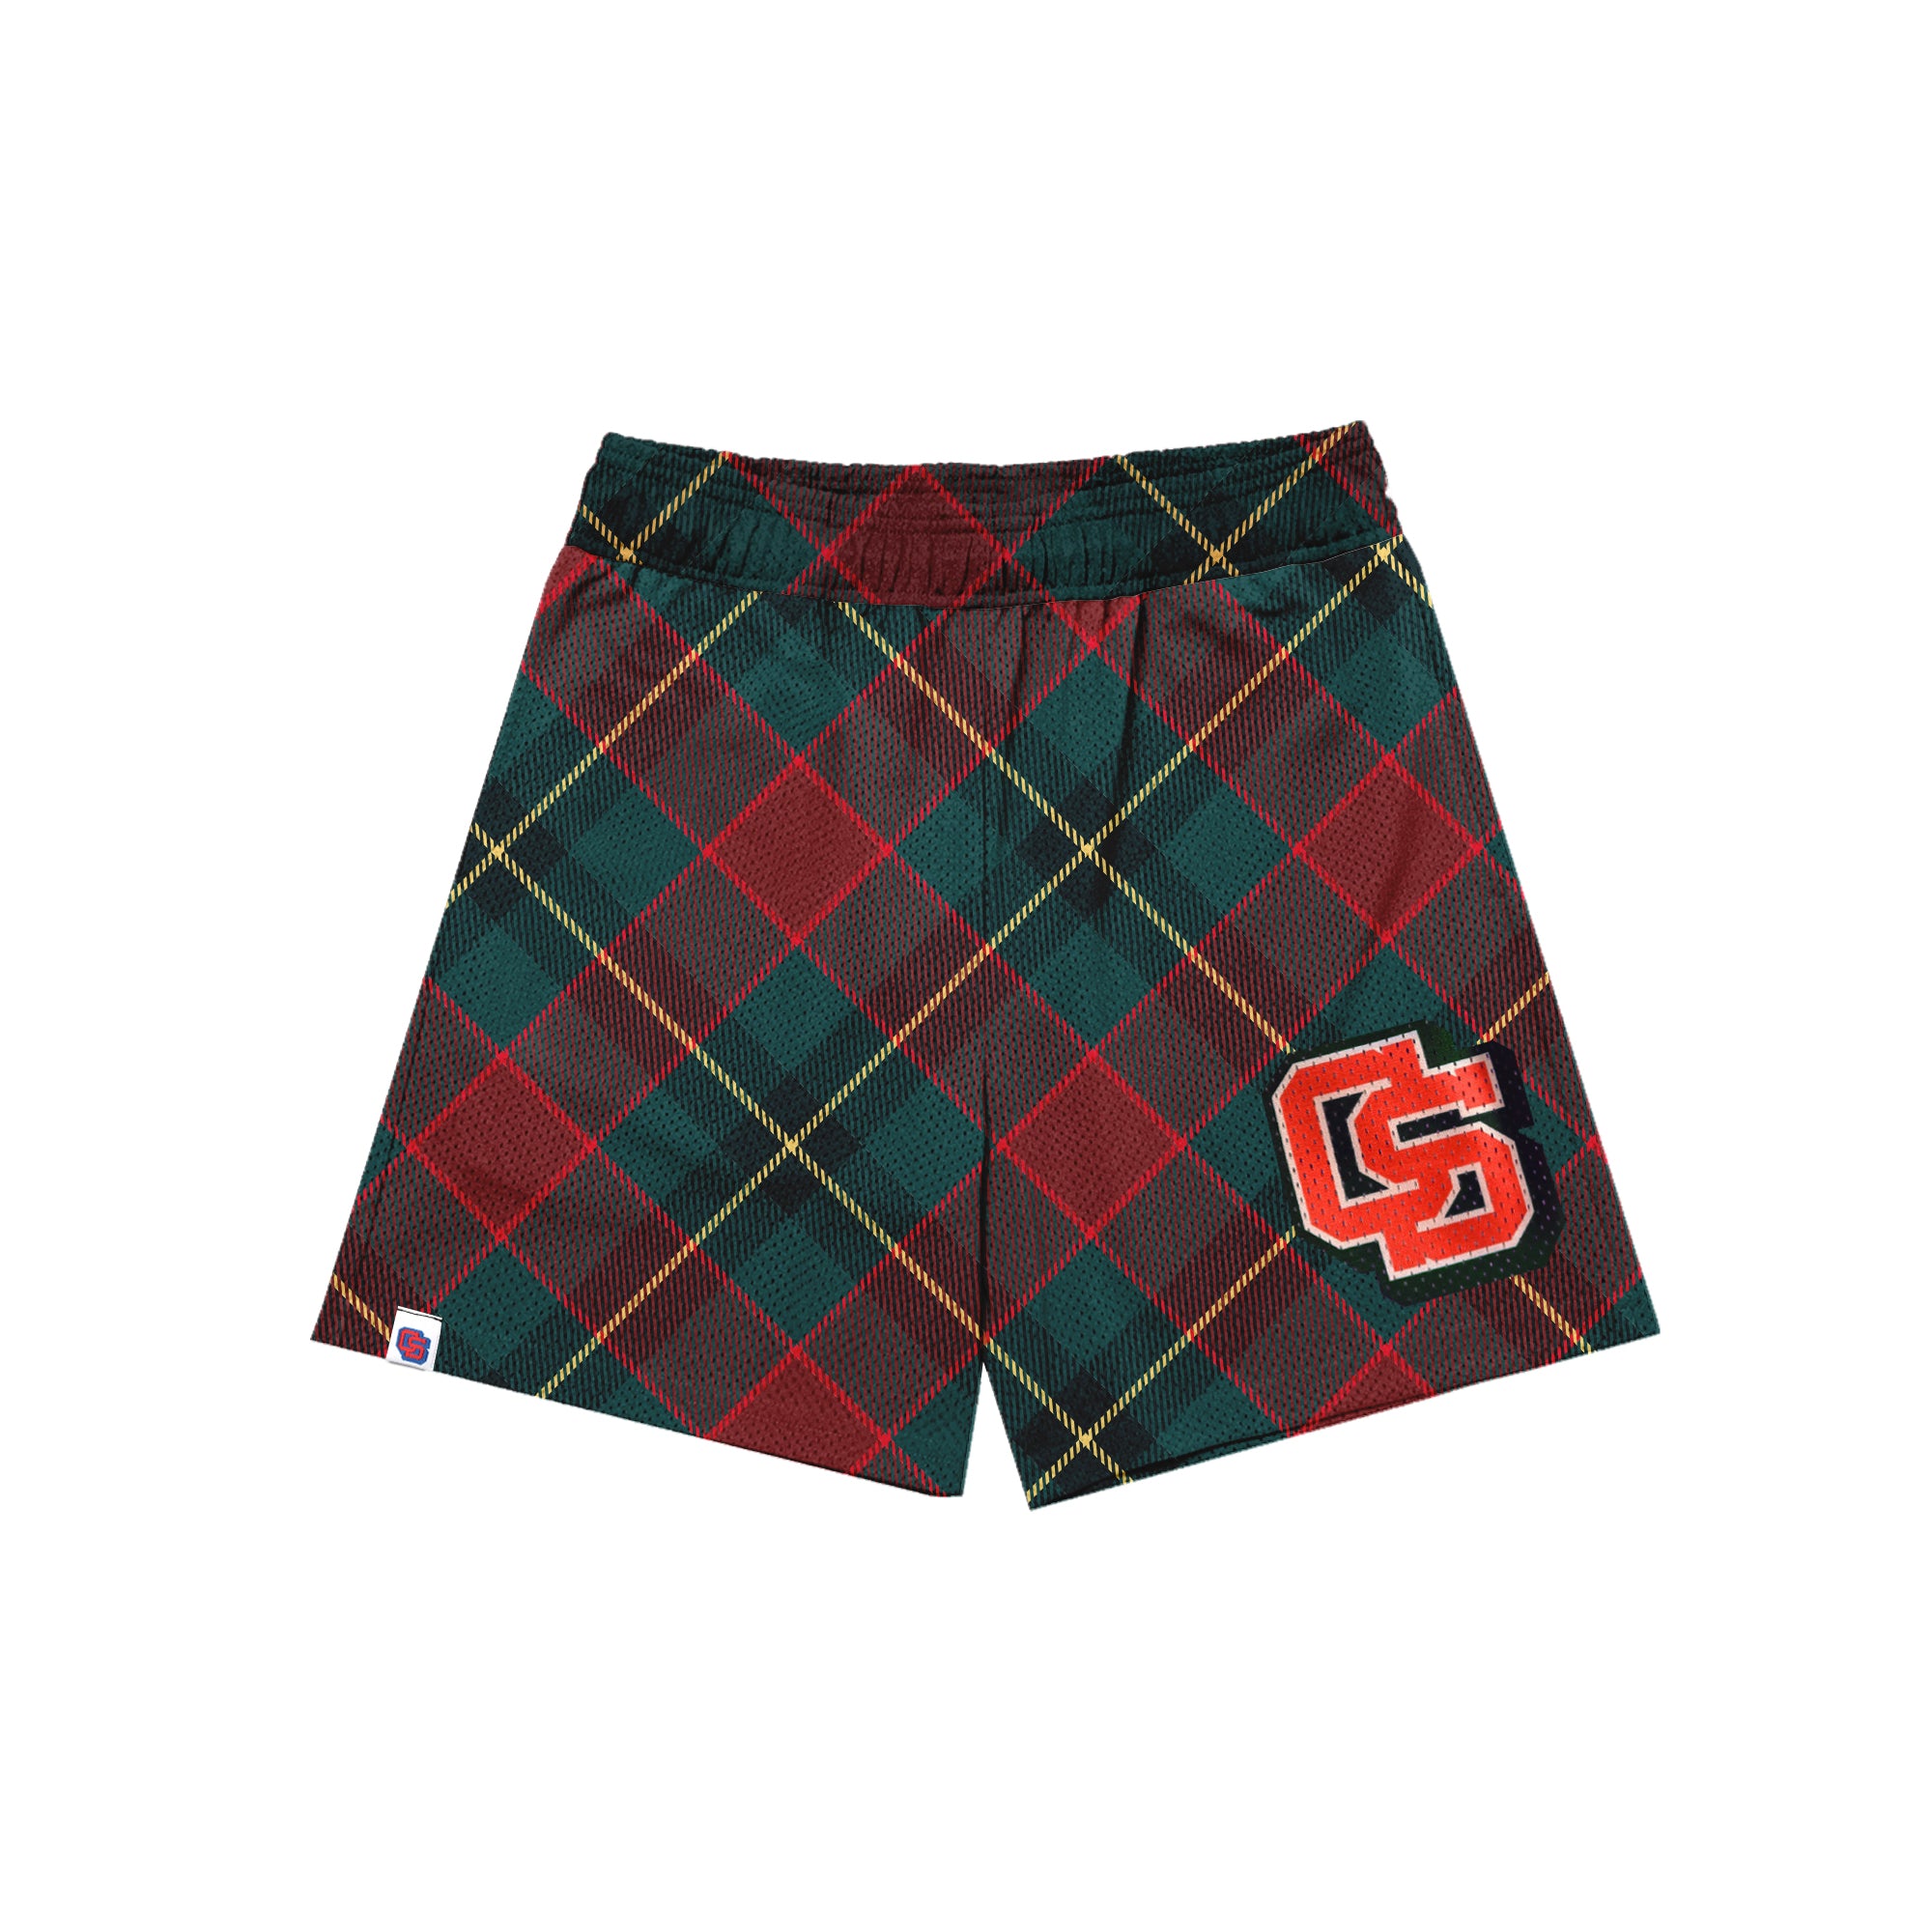 SELECT PRACTICE SHORTS (LIMITED)